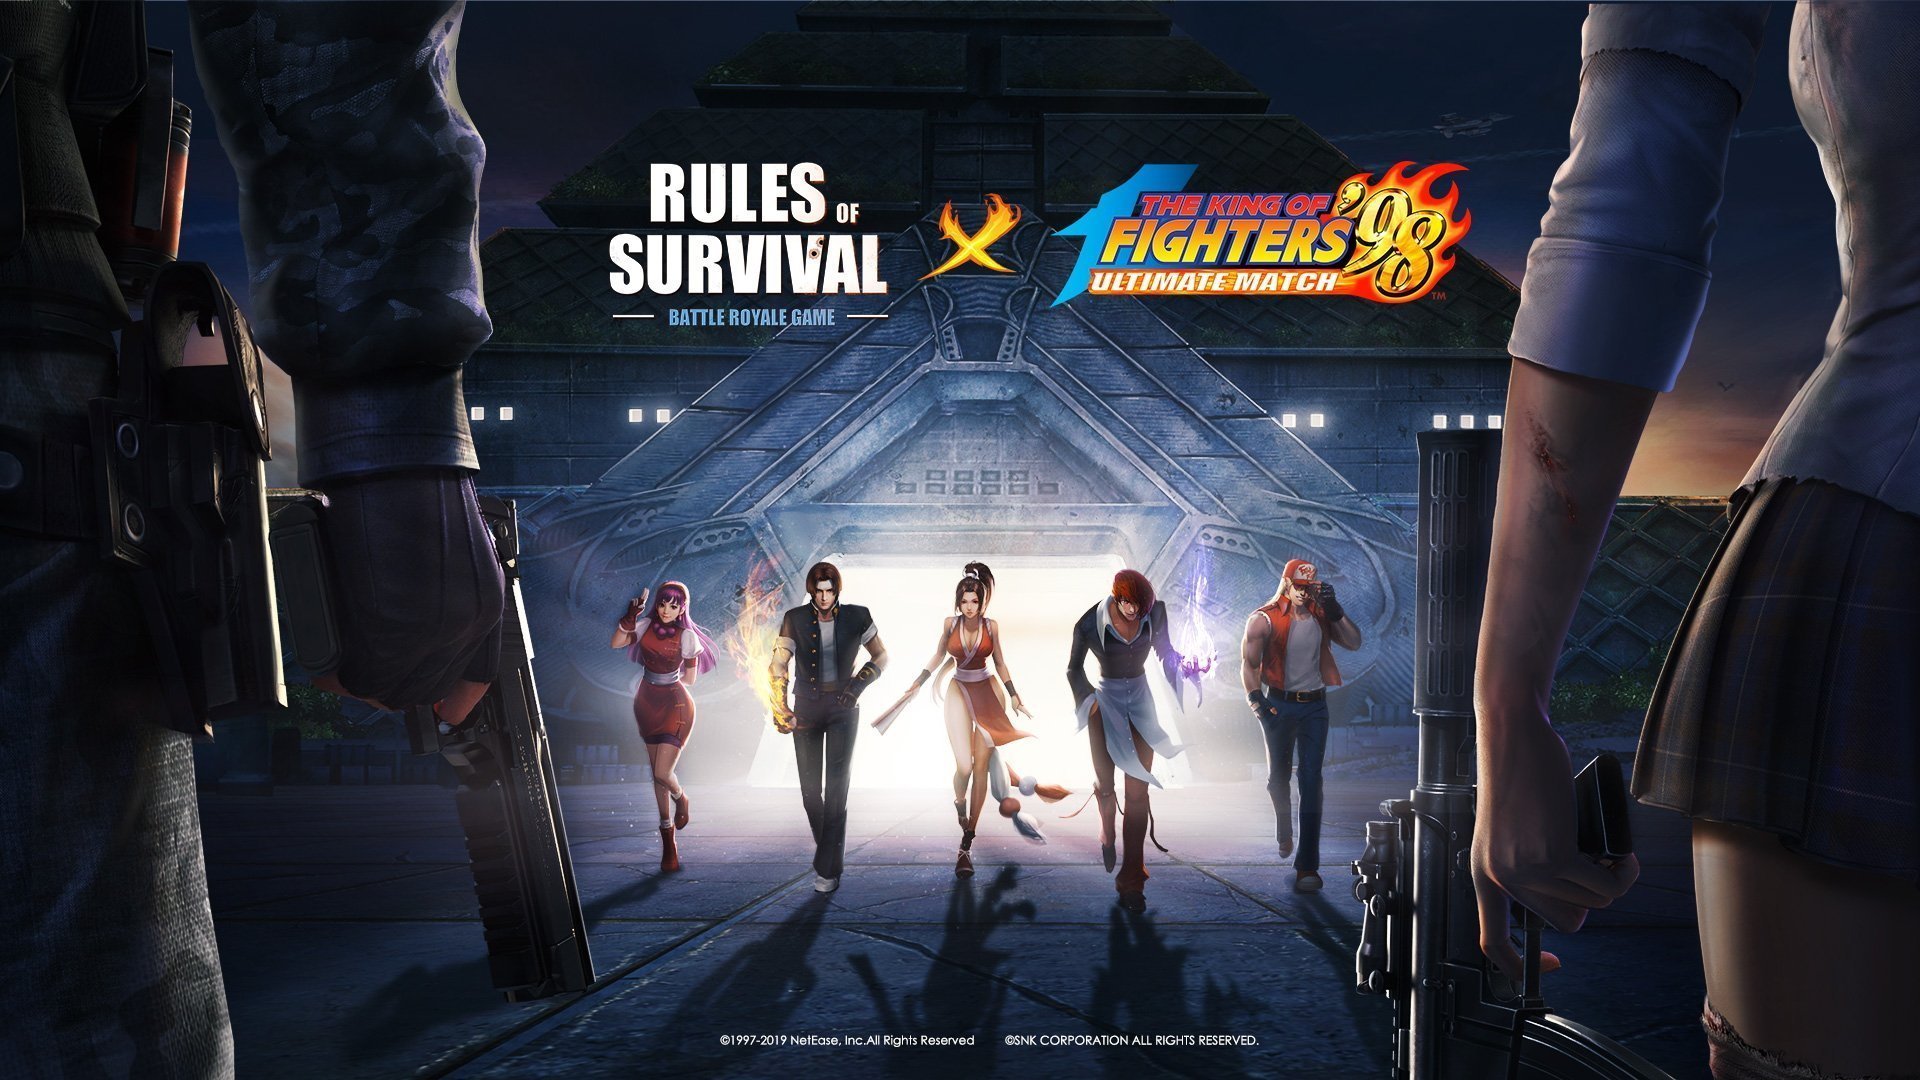 Your game your rules. Рулес оф СУРВАЙВЛ. Rules od Survival. Rules of Survival game. Rules of Survival NETEASE game.